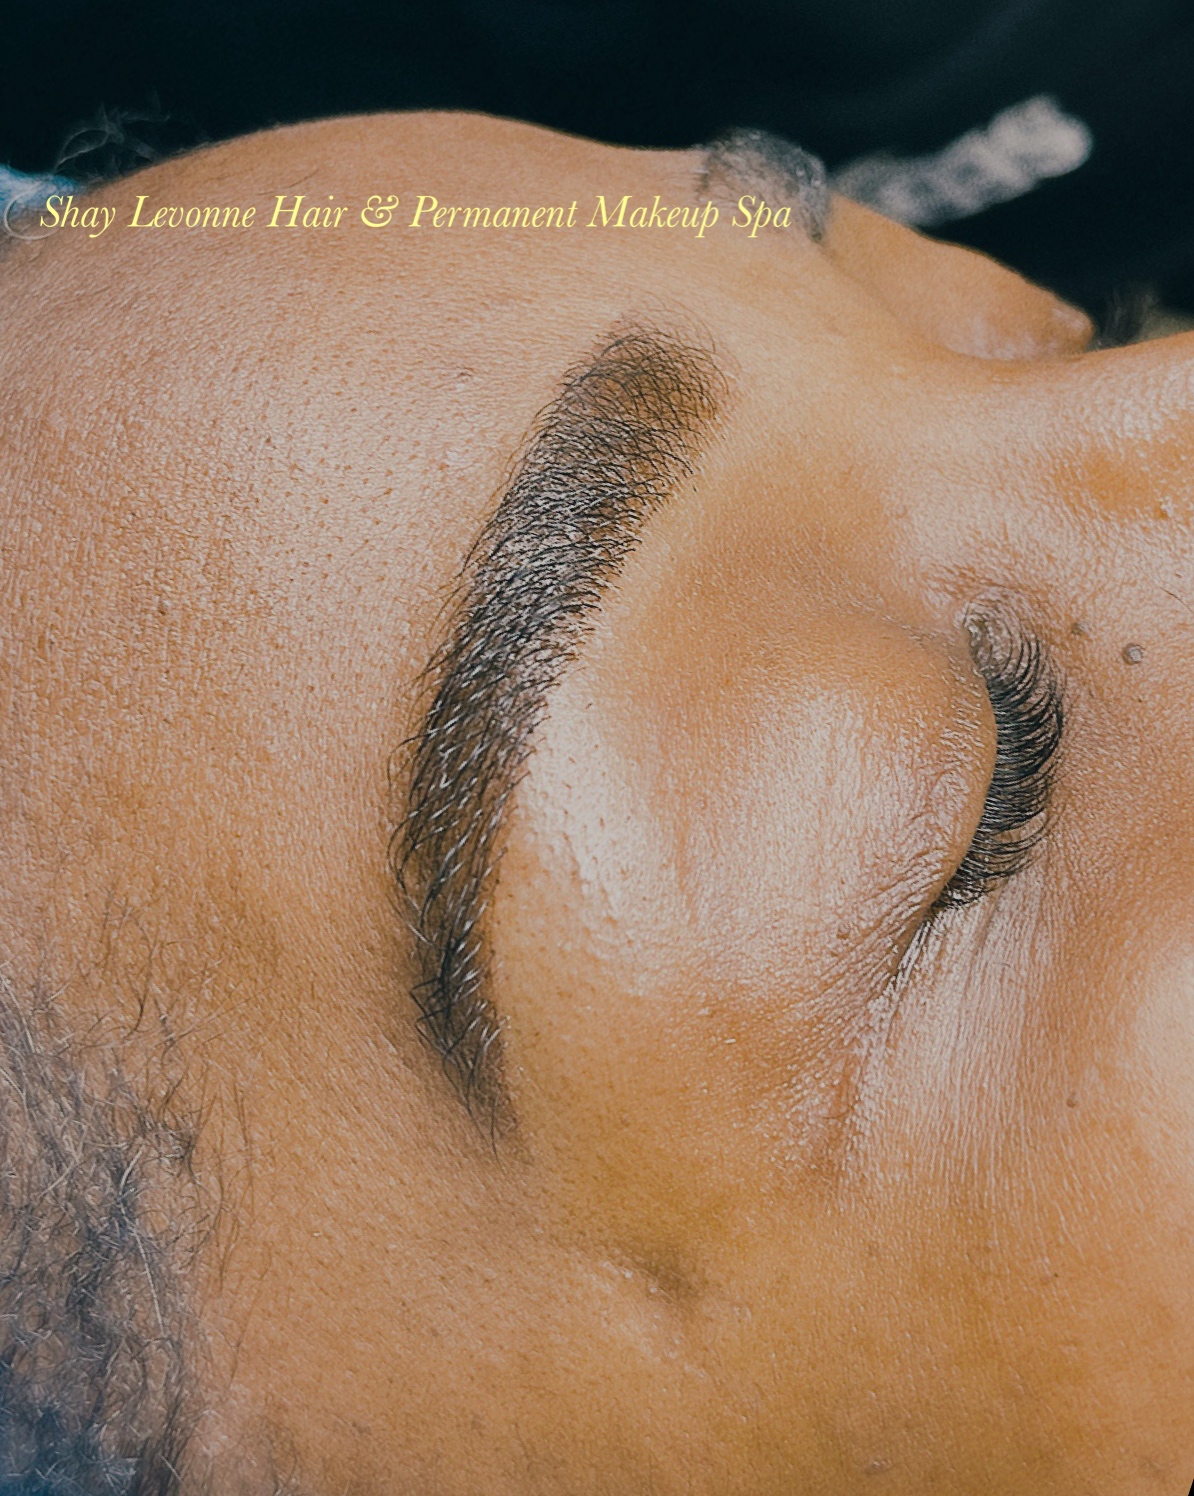 Shay Levonne Hair and Permanent Makeup Spa